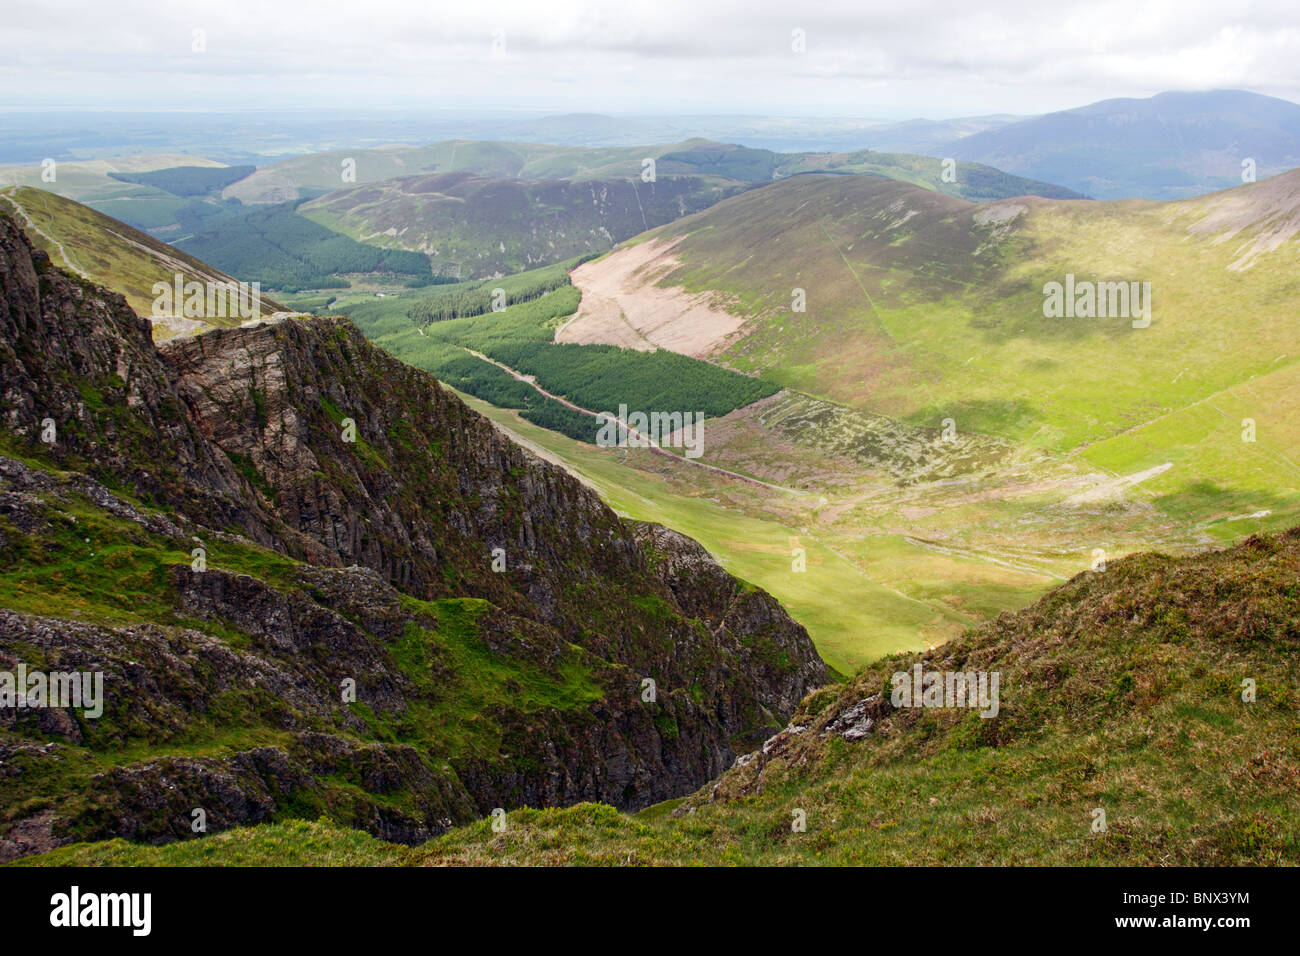 Looking down from Hobcarton Crag on Hopegill Head towards Grisedale Pike and Whinlatter Forest in the Lake District, Cumbria. Stock Photo